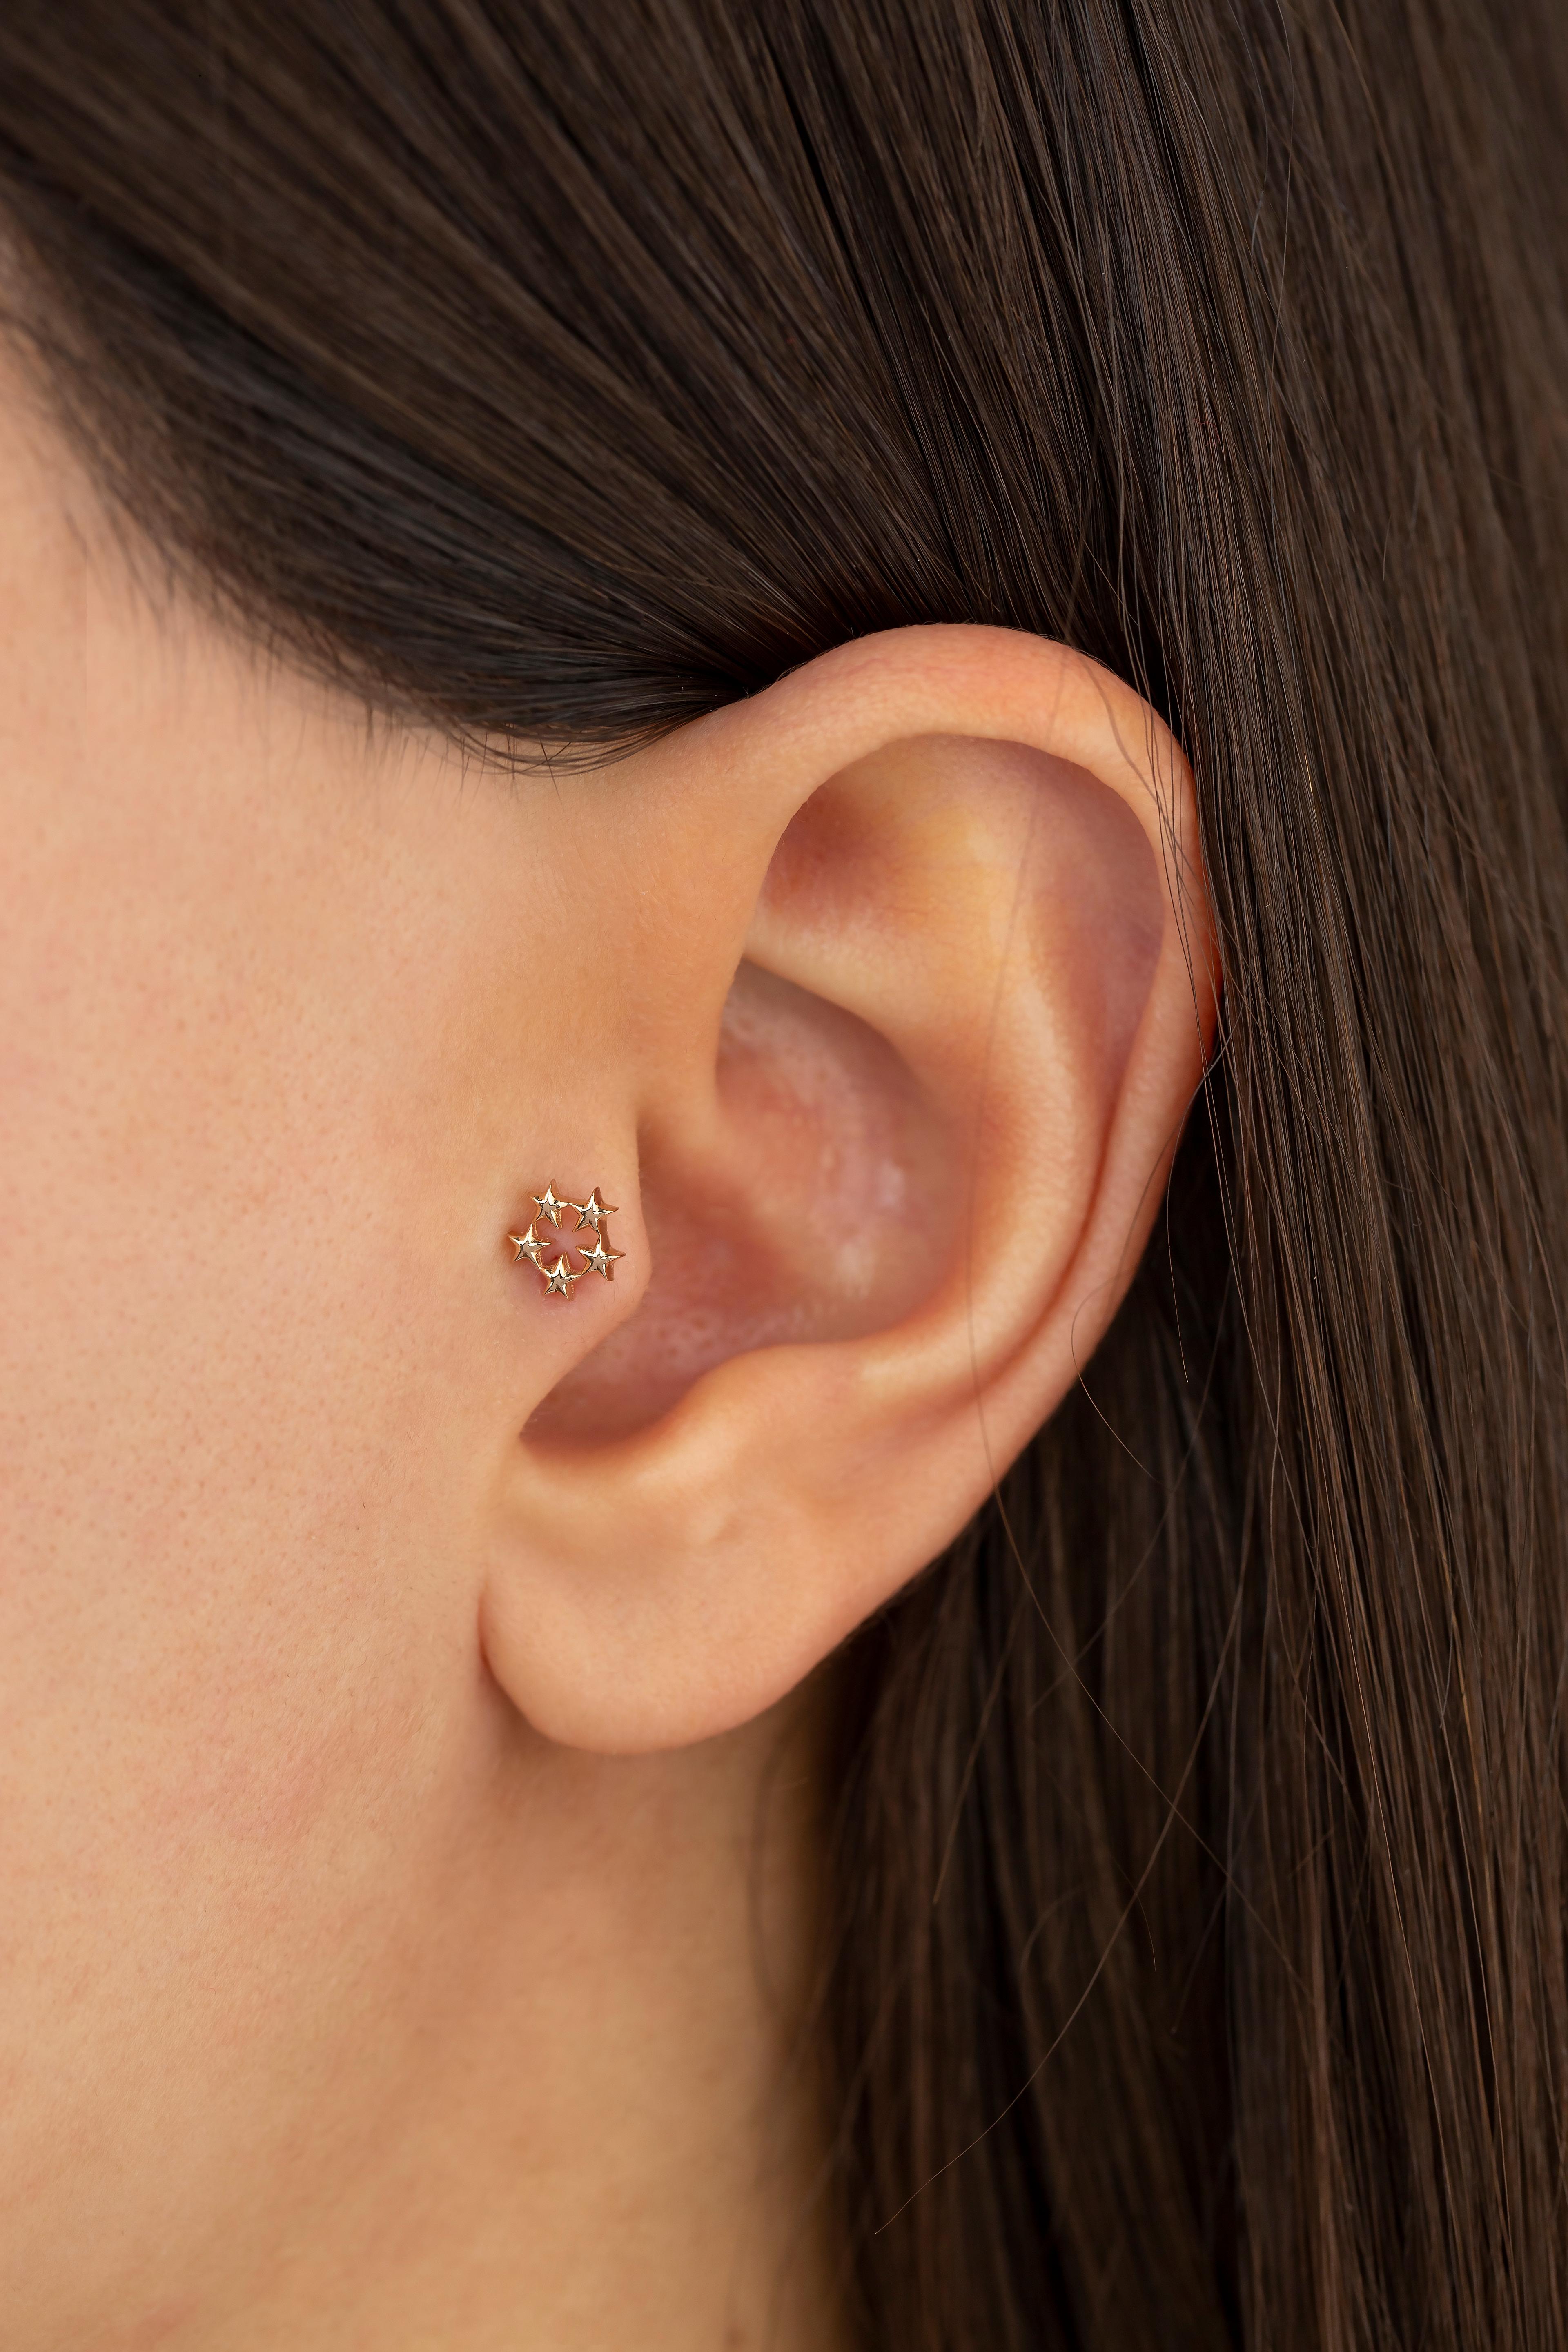 14K Rose Gold Five Stars Piercing, Stars Gold Stud Earring

You can use the piercing as an earring too! Also this piercing is suitable for tragus, nose, helix, lobe, flat, medusa, monreo, labret and stud.

This piercing was made with quality